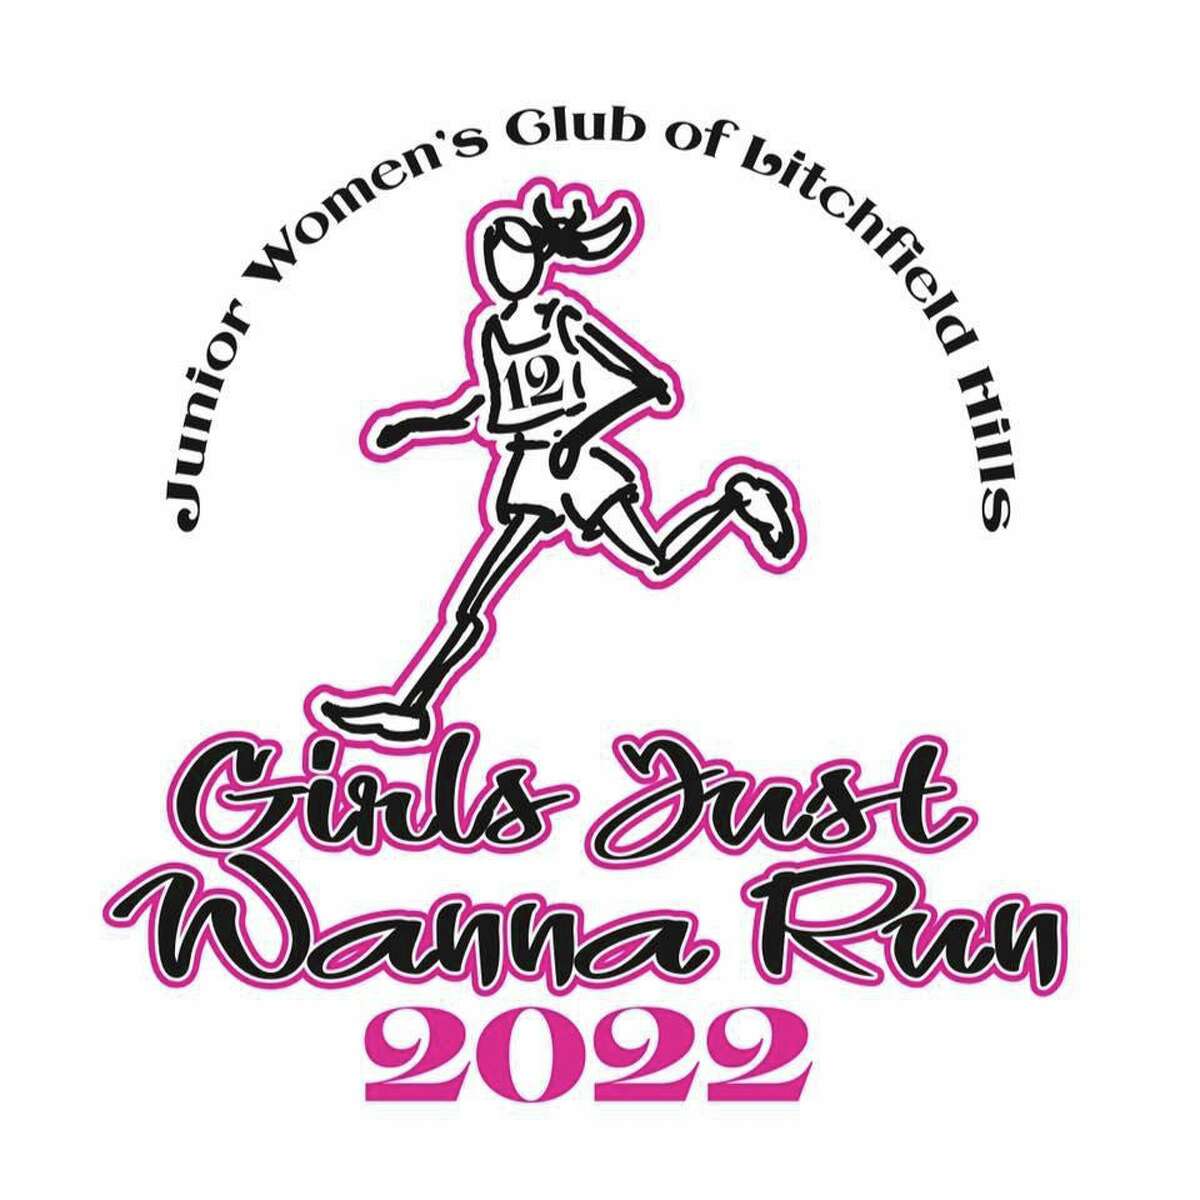 The Girls Just Wanna Run race is set for May 1.